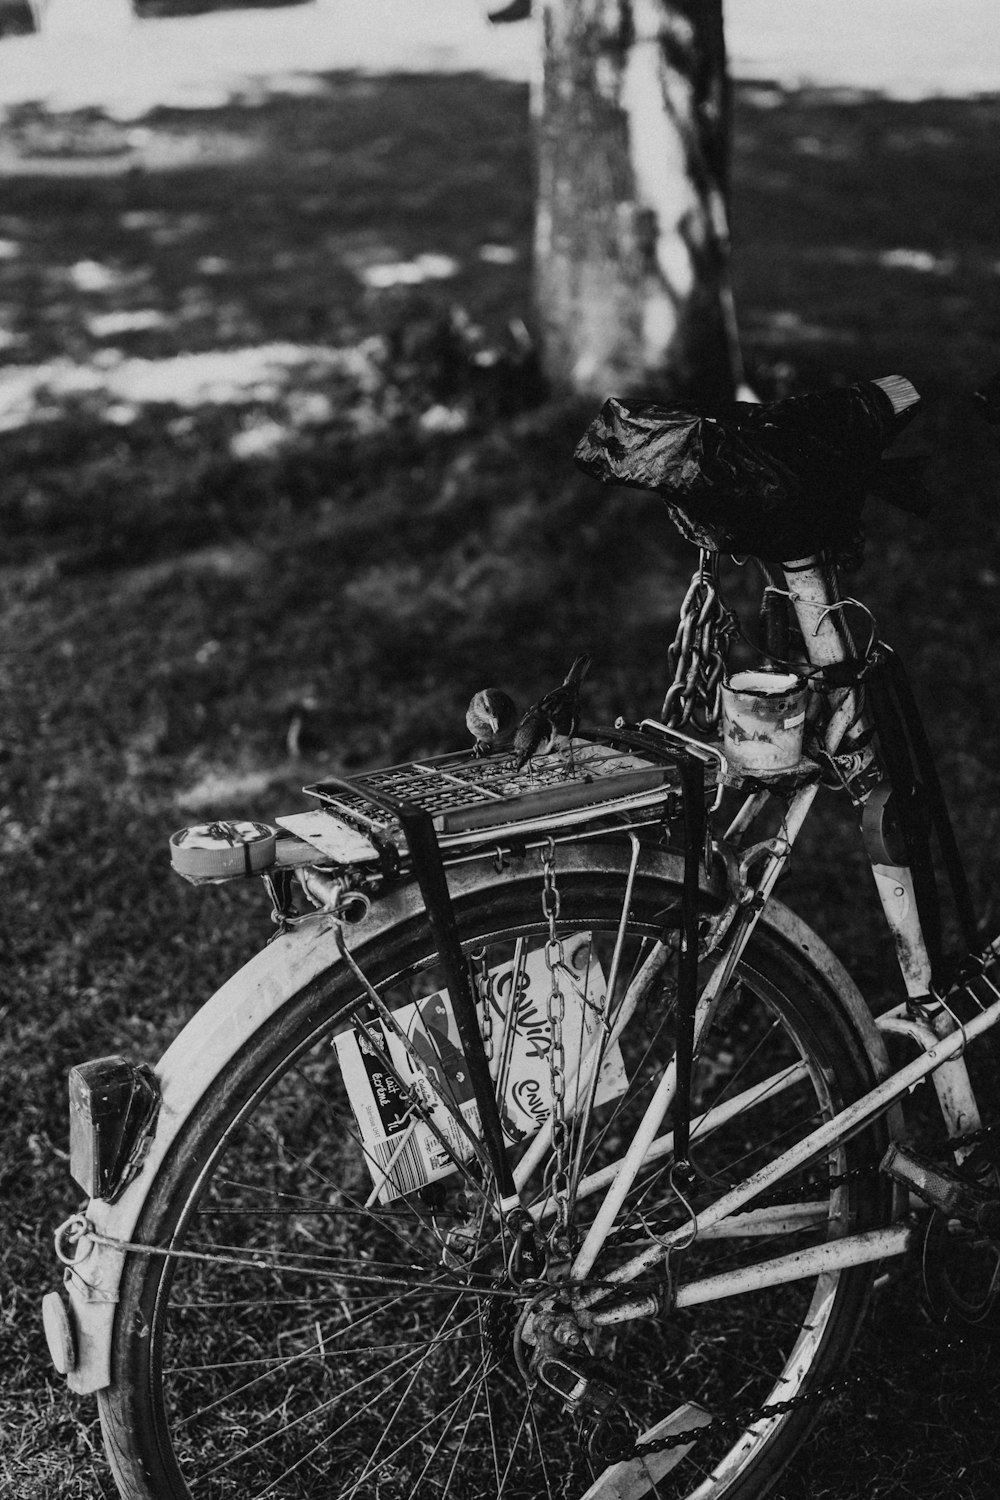 grayscale photo of person riding bicycle